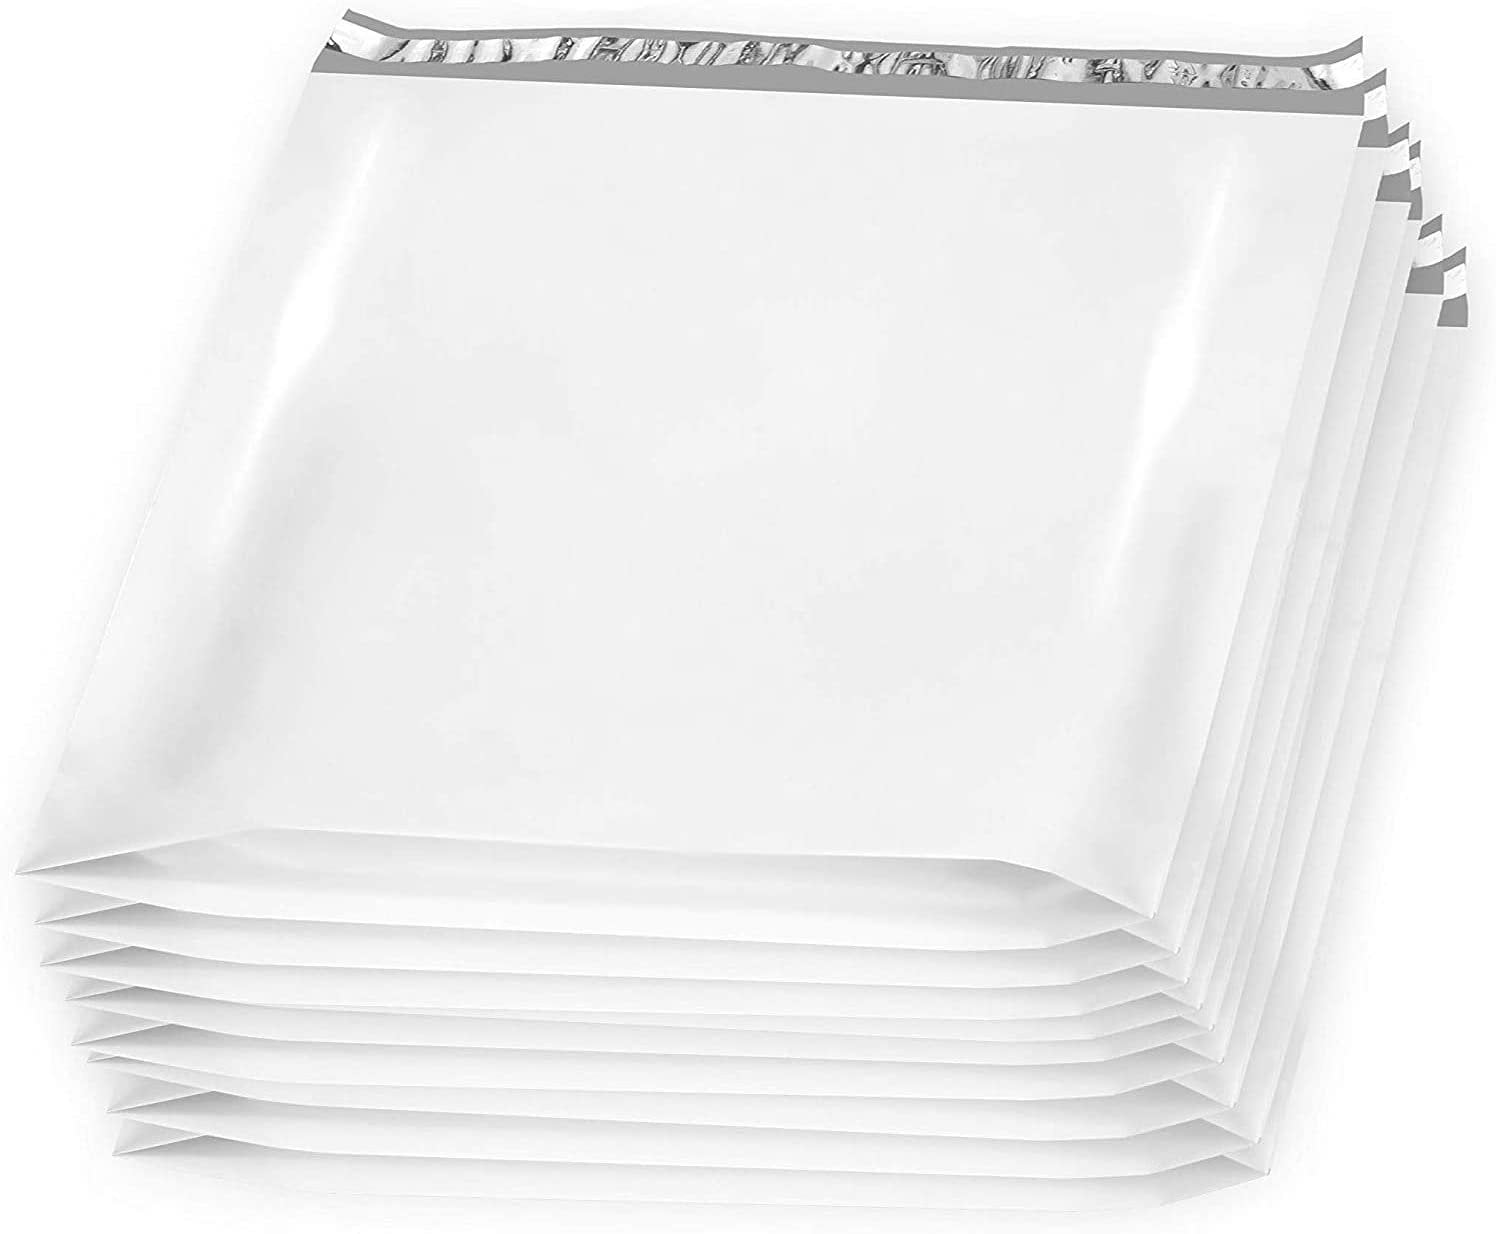 200 Pieces Premium 9 x 12 Inch White Poly Mailer Free Priority Mail Shipping 